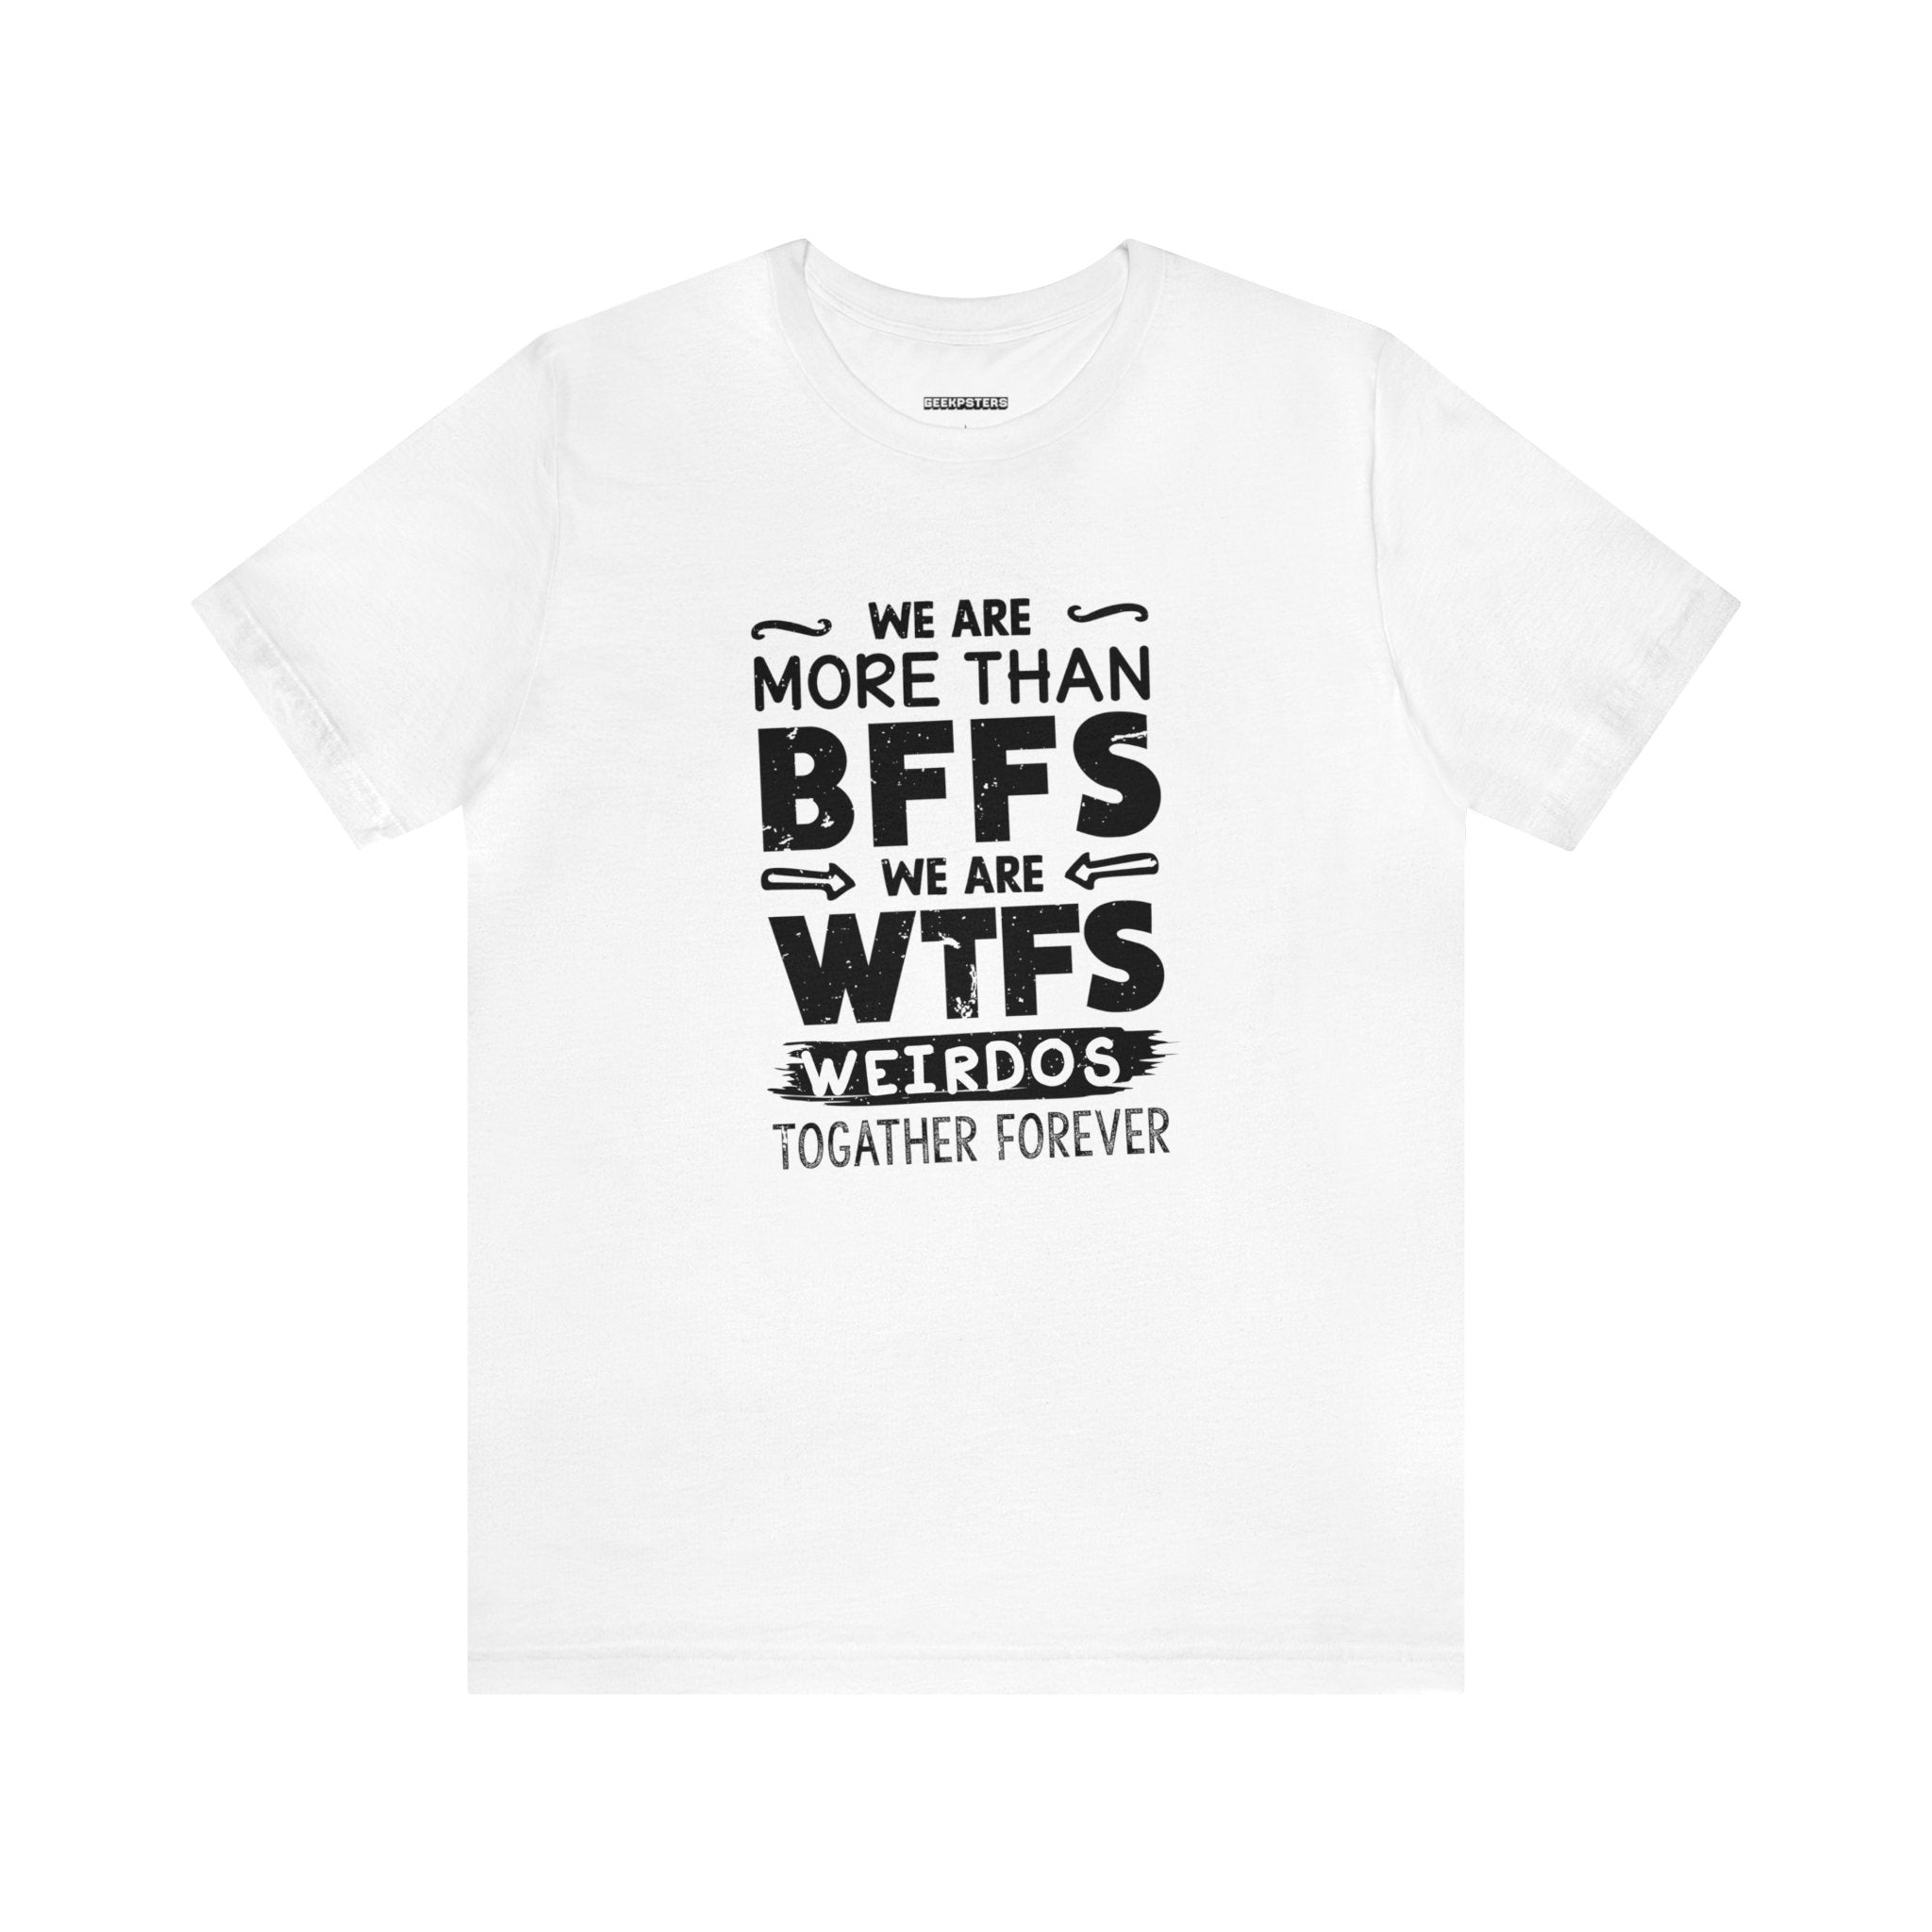 Order a white We Are More T-Shirt today that says we are more than bffs.